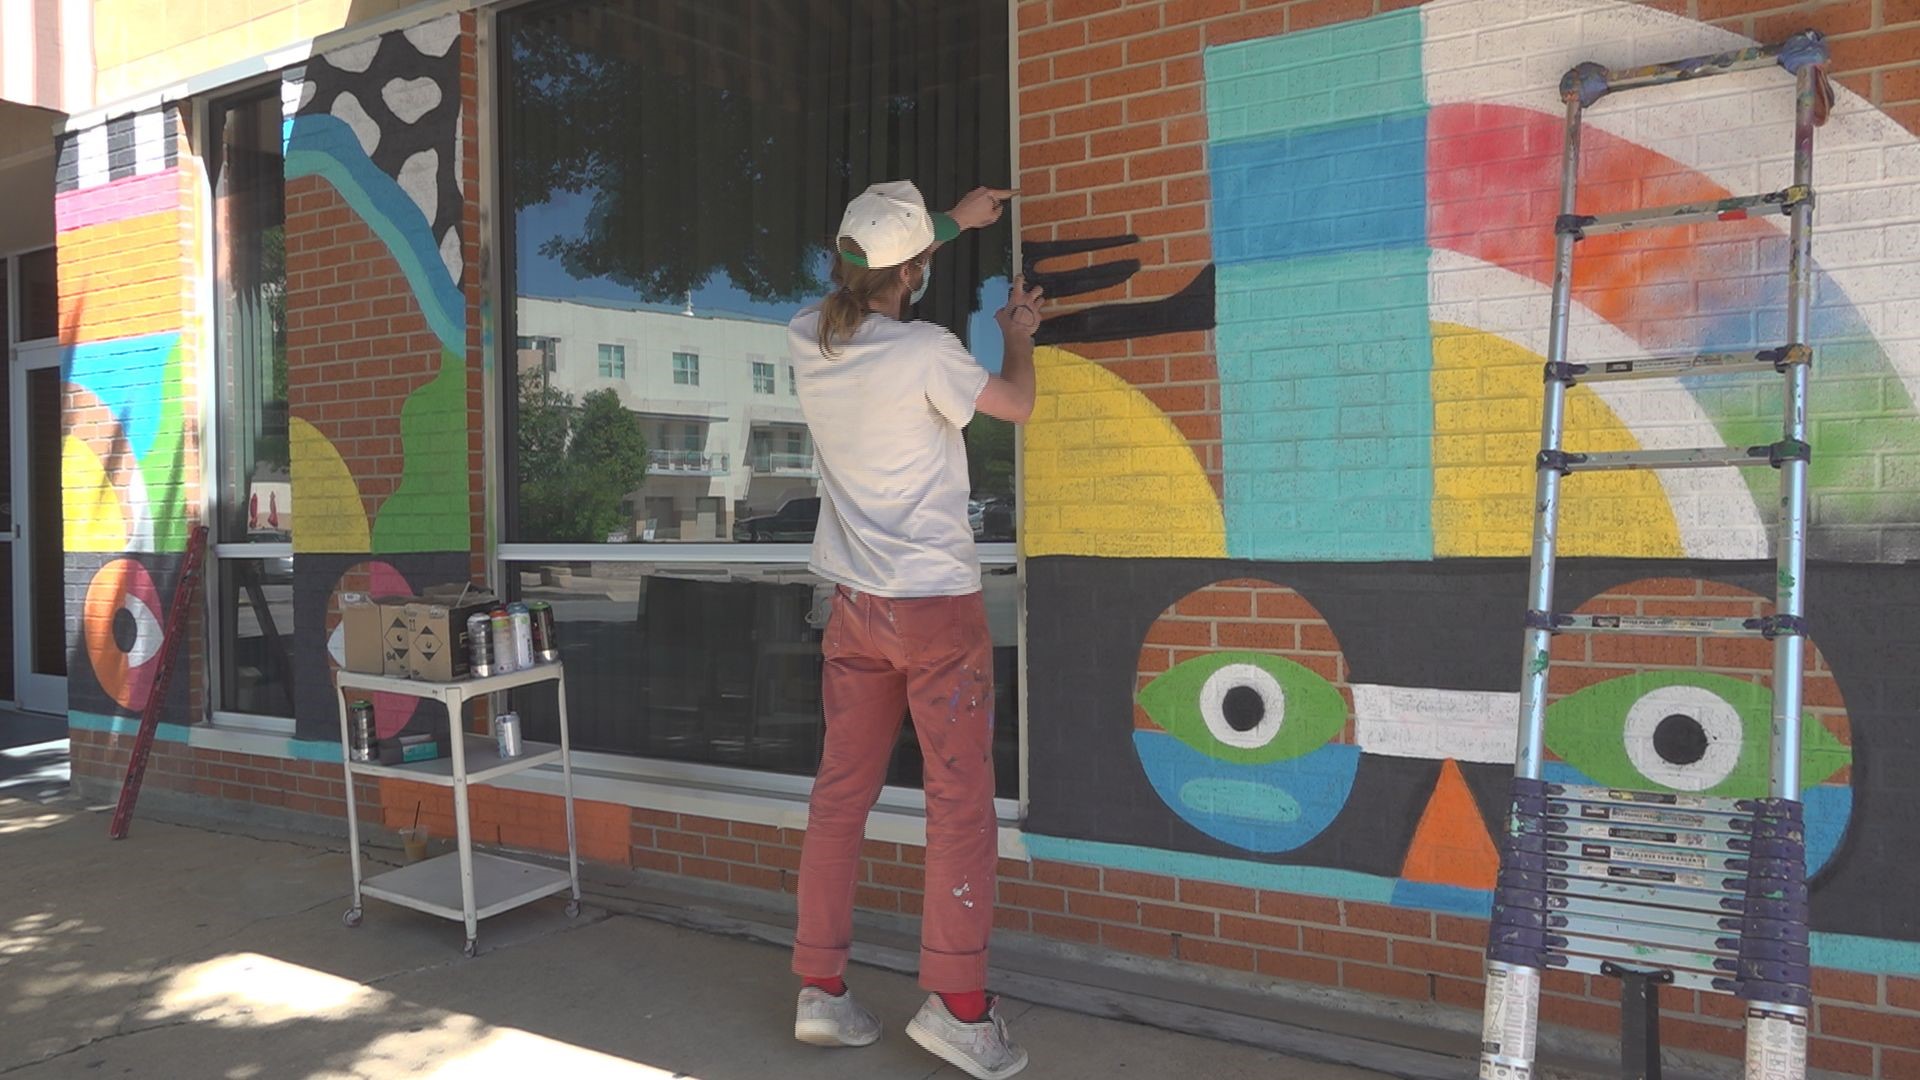 The event is hosted in Downtown Waco where 50 artists are turning Austin Avenue into a walking art gallery sponsored by local businesses, with more than 100 vendors.